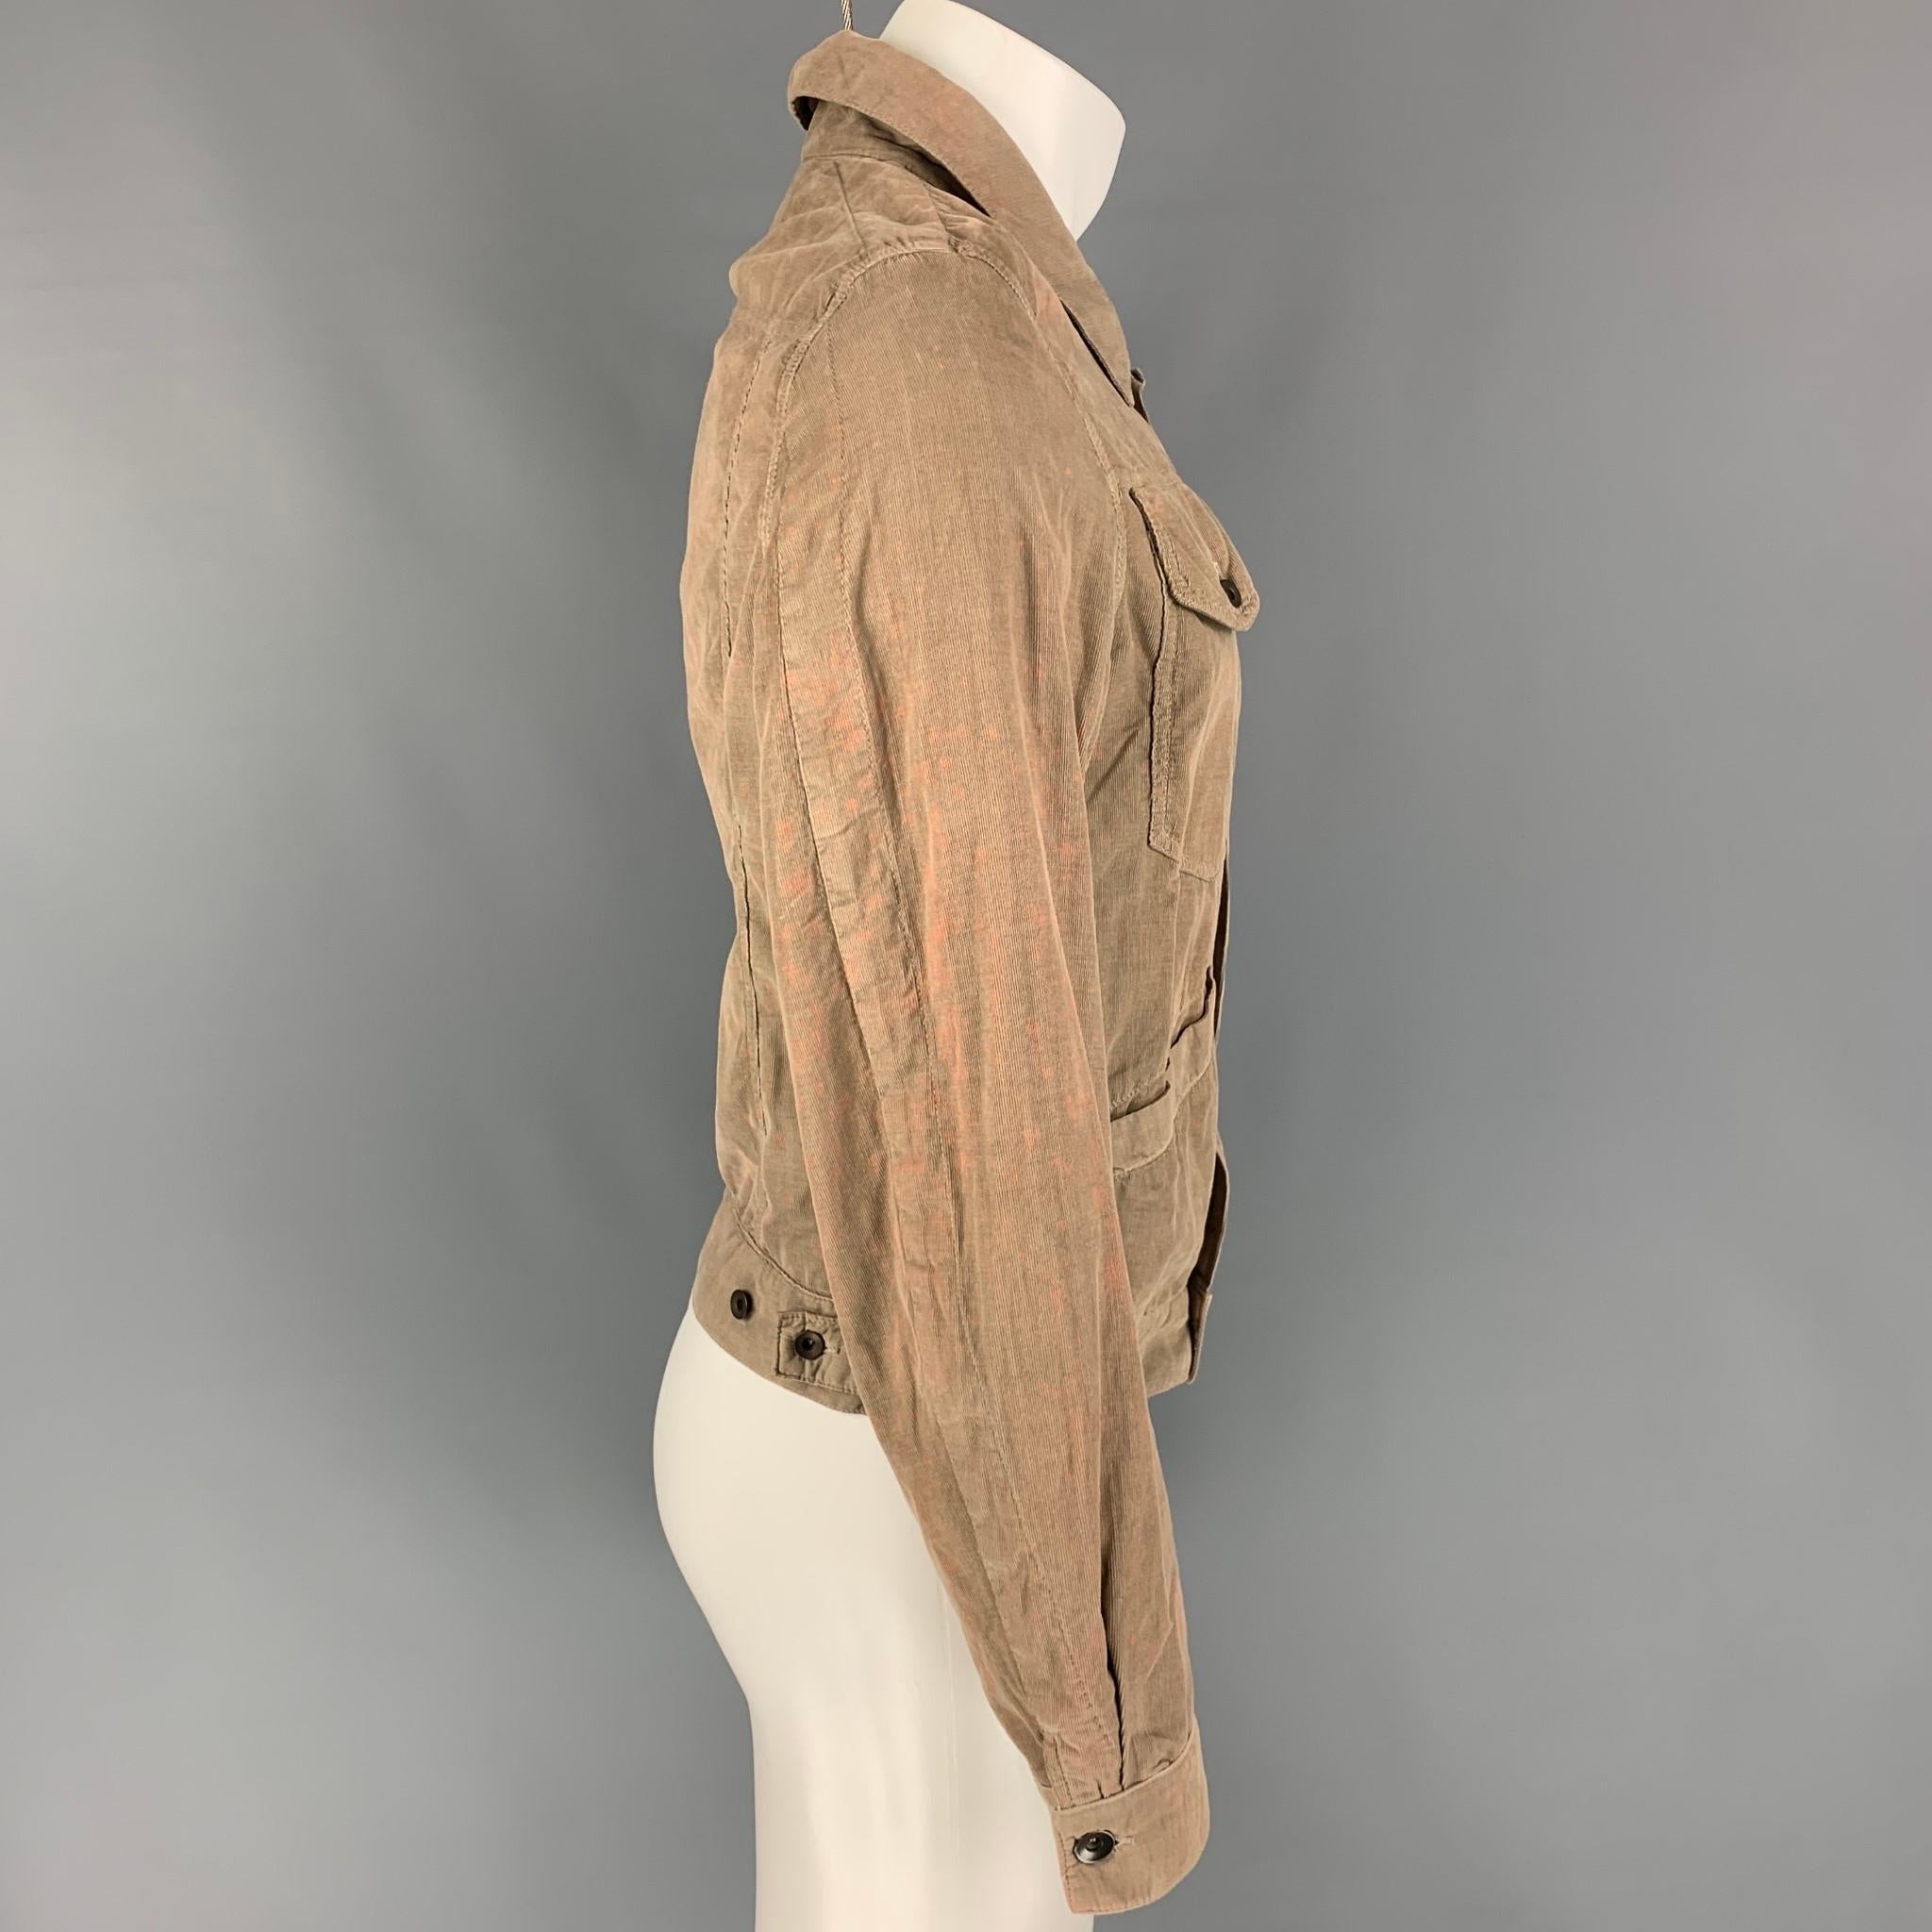 RICK OWENS jacket comes in a khaki cotton with distressed details featuring a trucker style, front pockets, and a buttoned closure. Made in Italy. 

Good Pre-Owned Condition.
Marked: M

Measurements:

Shoulder: 16.5 in.
Chest: 40 in.
Sleeve: 26.5